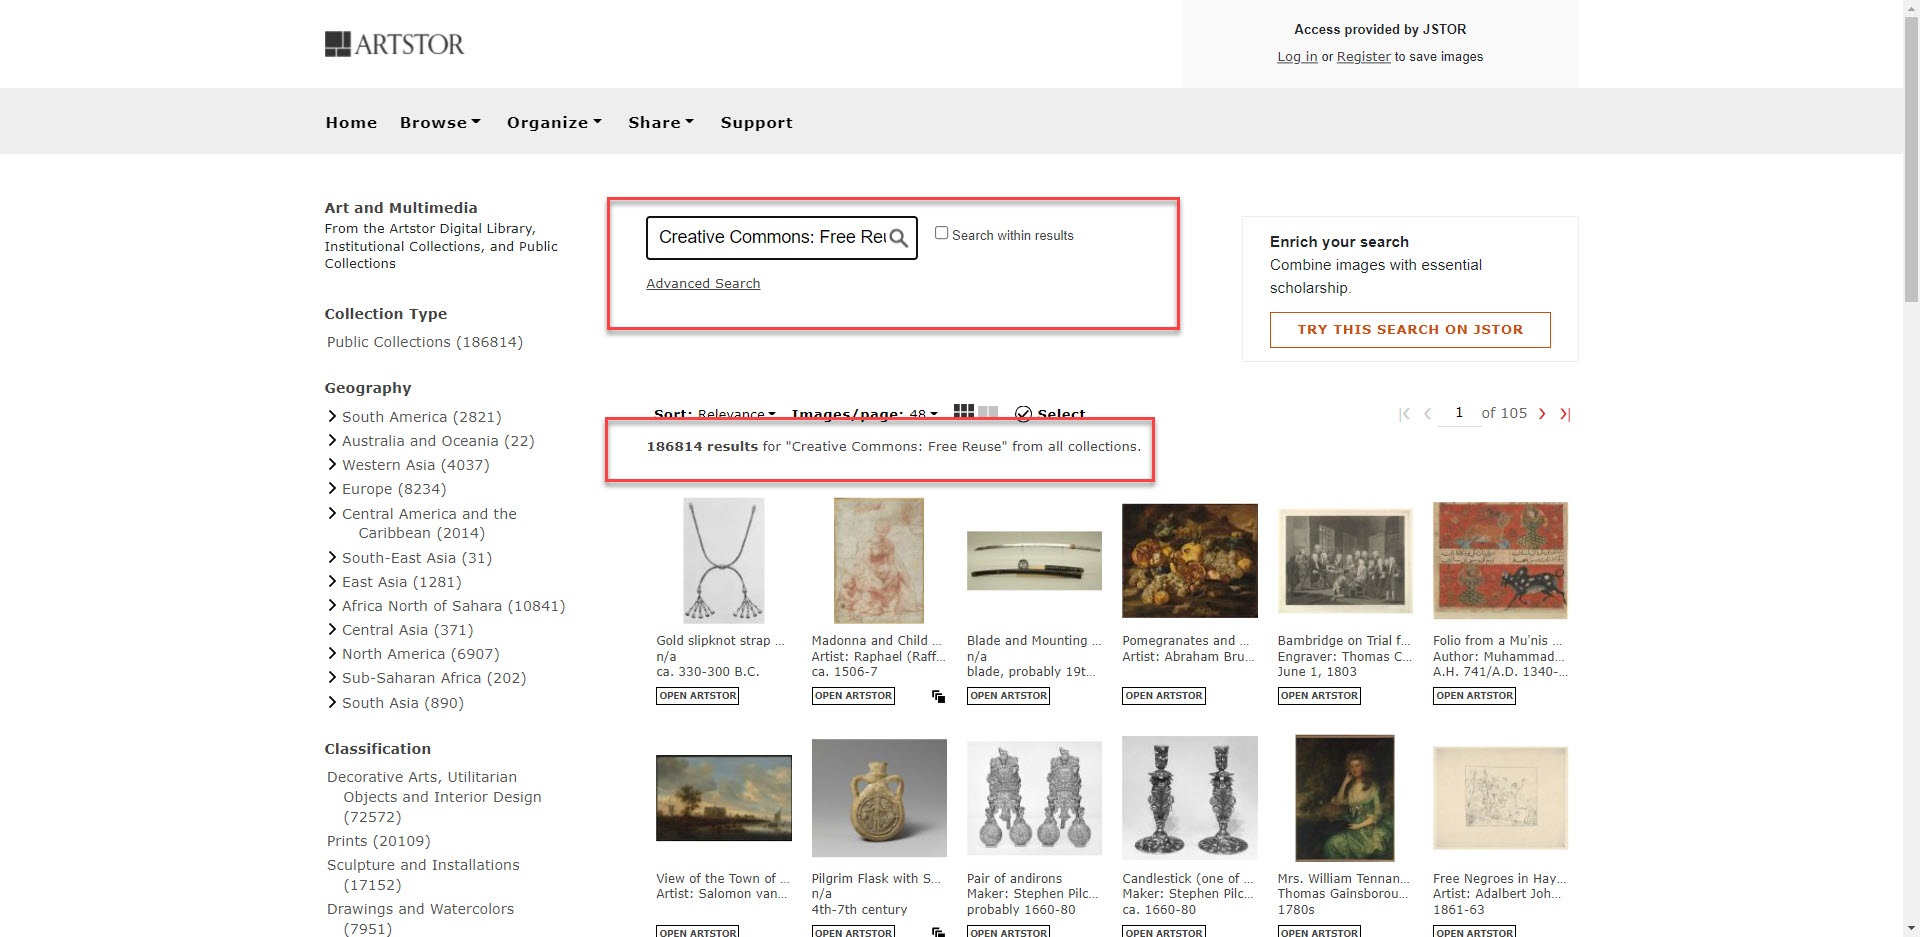 Keyword searching Artstor for Creative Commons Free Reuse images